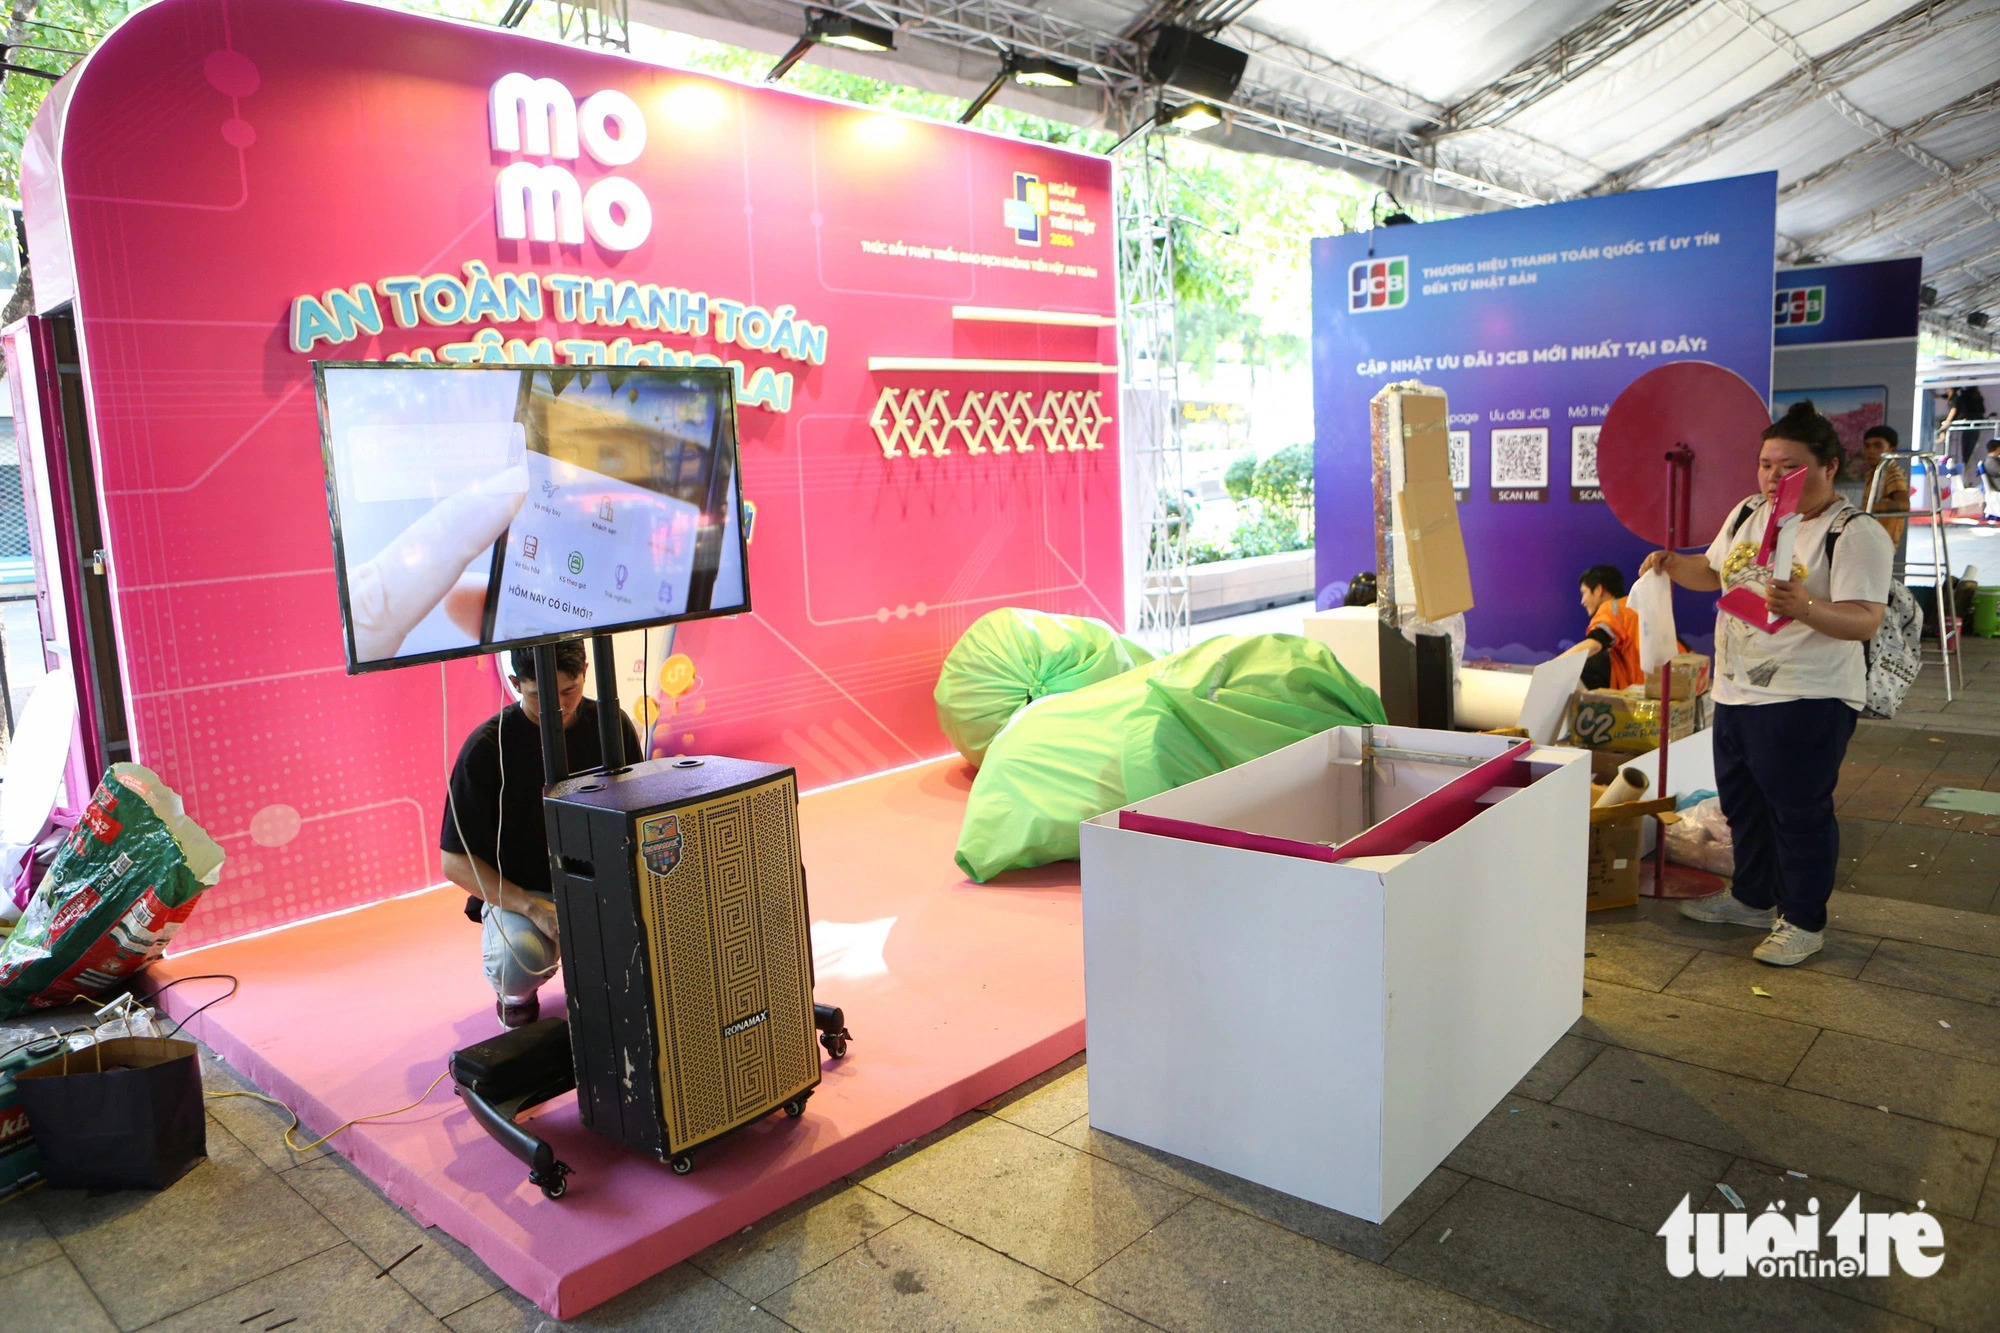 Festival-goers can explore the most popular payment trends. Photo: Phuong Quyen / Tuoi Tre